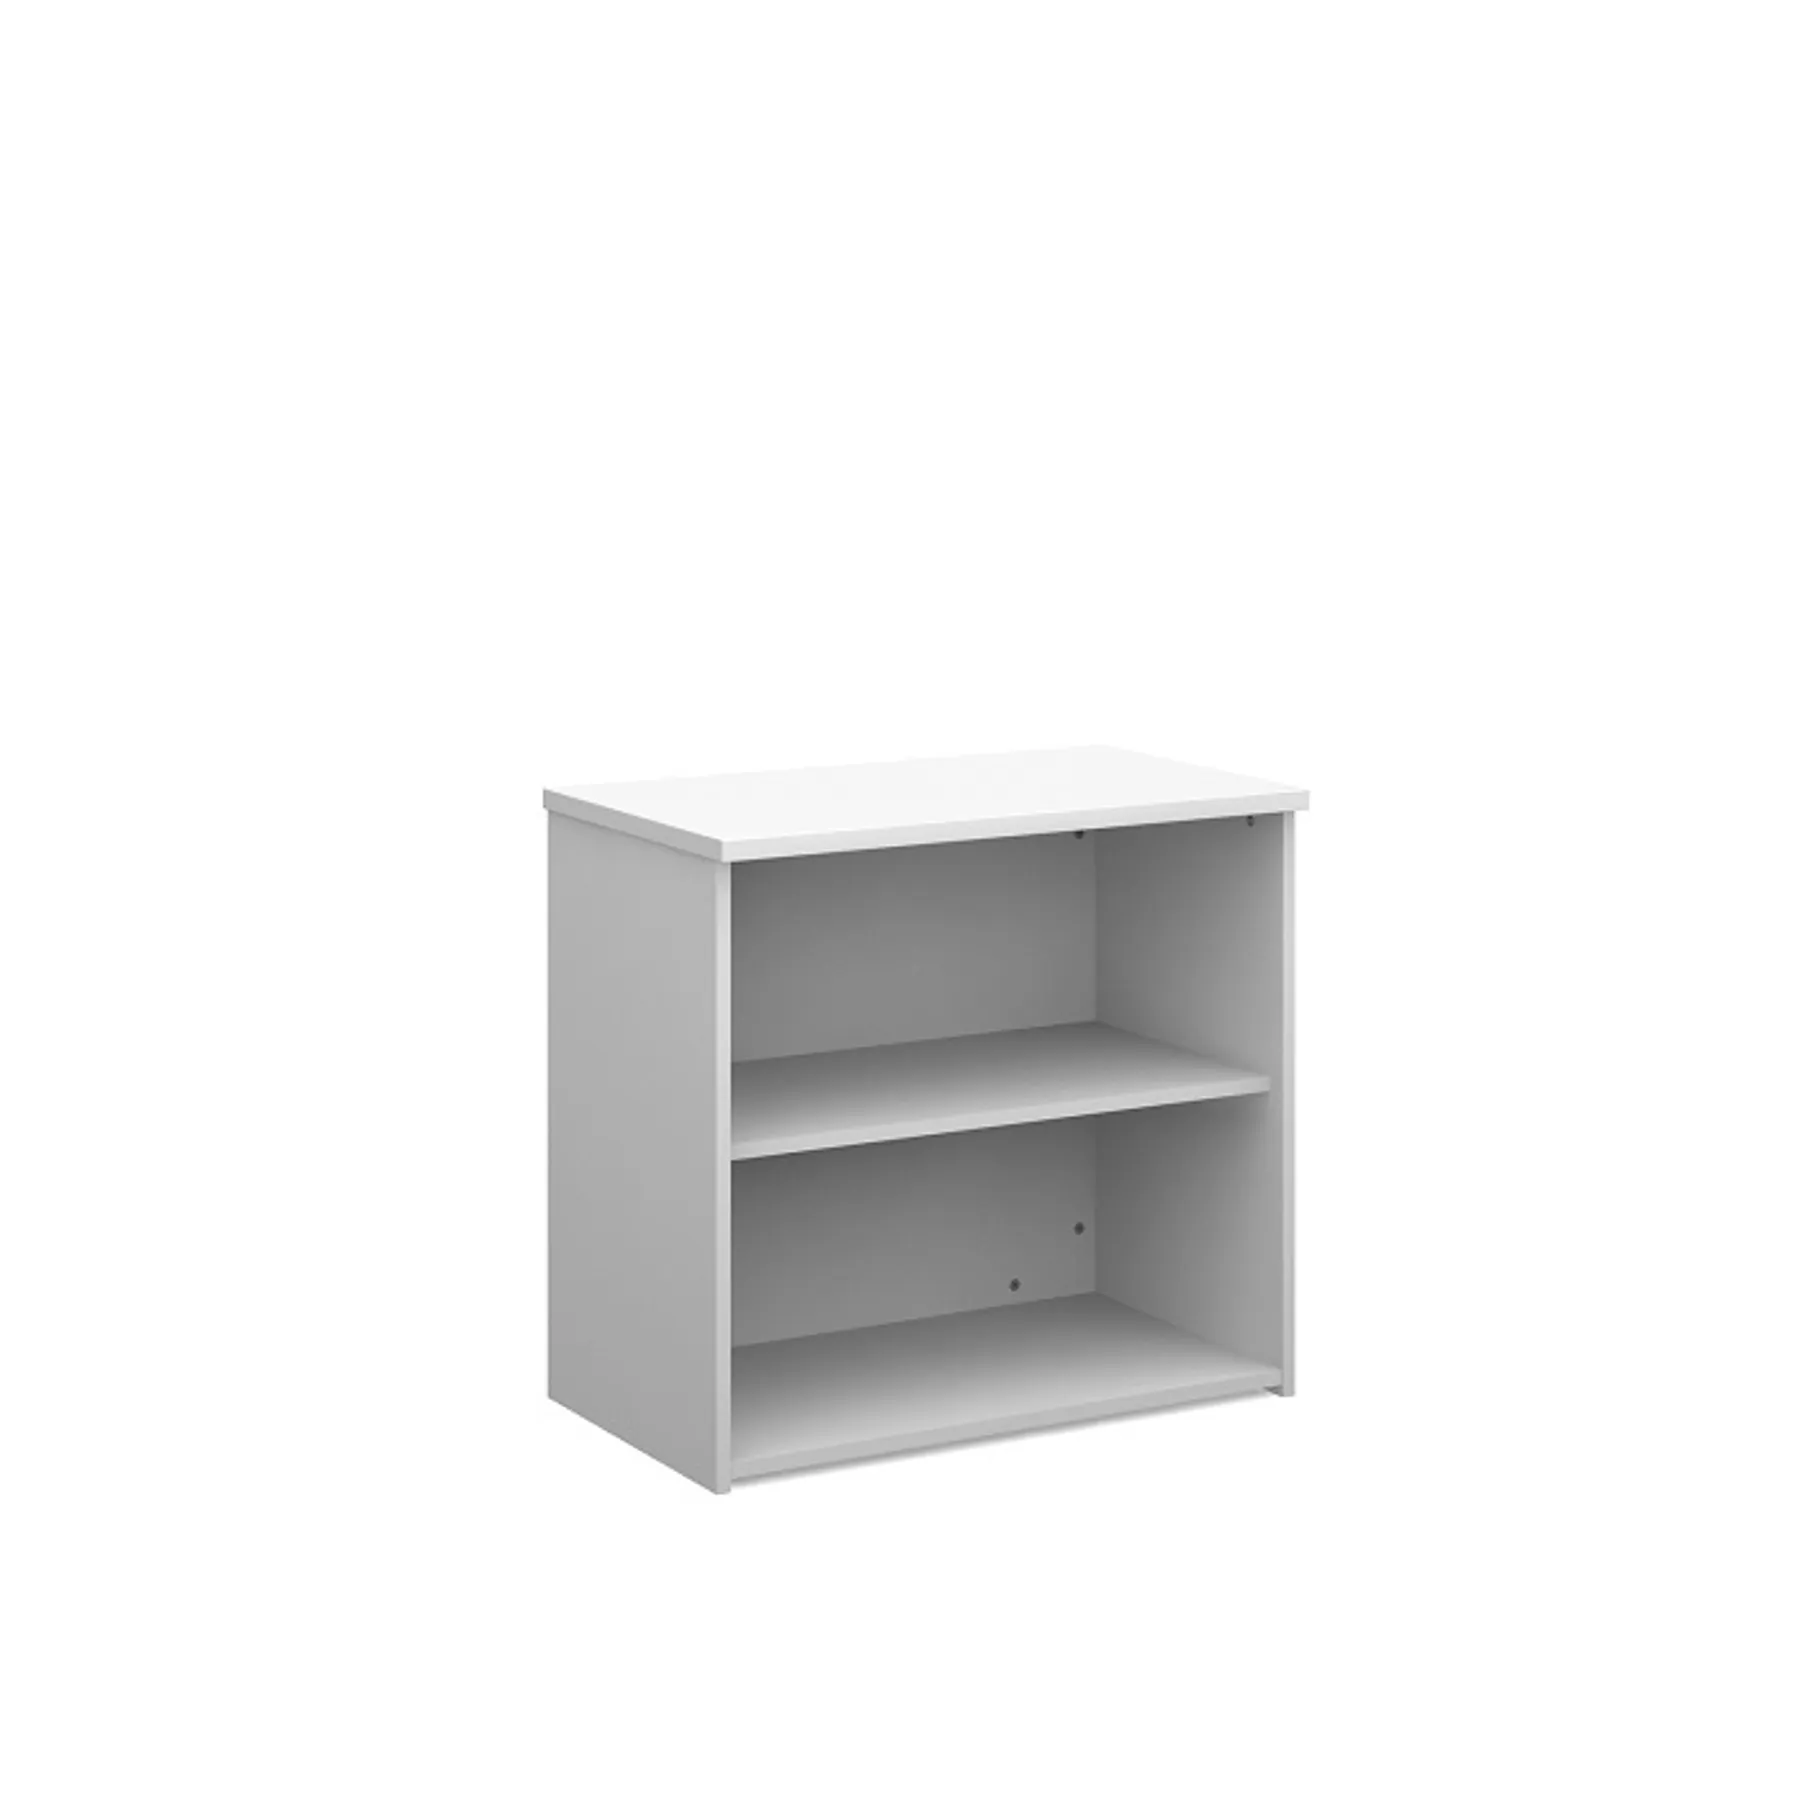 Lof direct dams bookcase 740mm high R740 WH